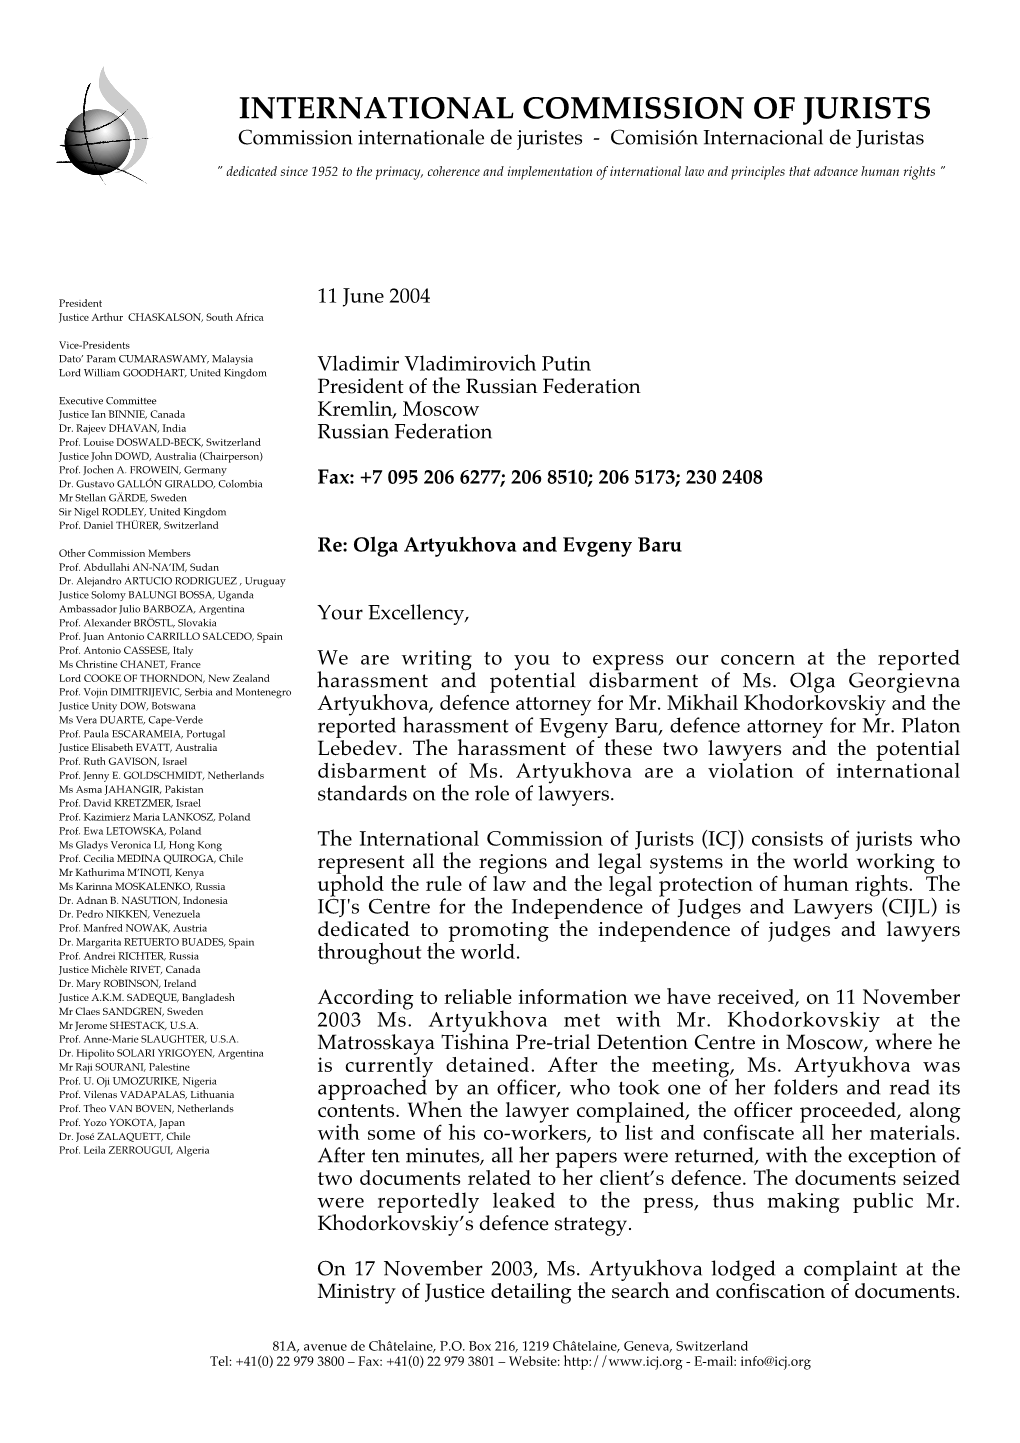 Letter to the President of the Russian Federation